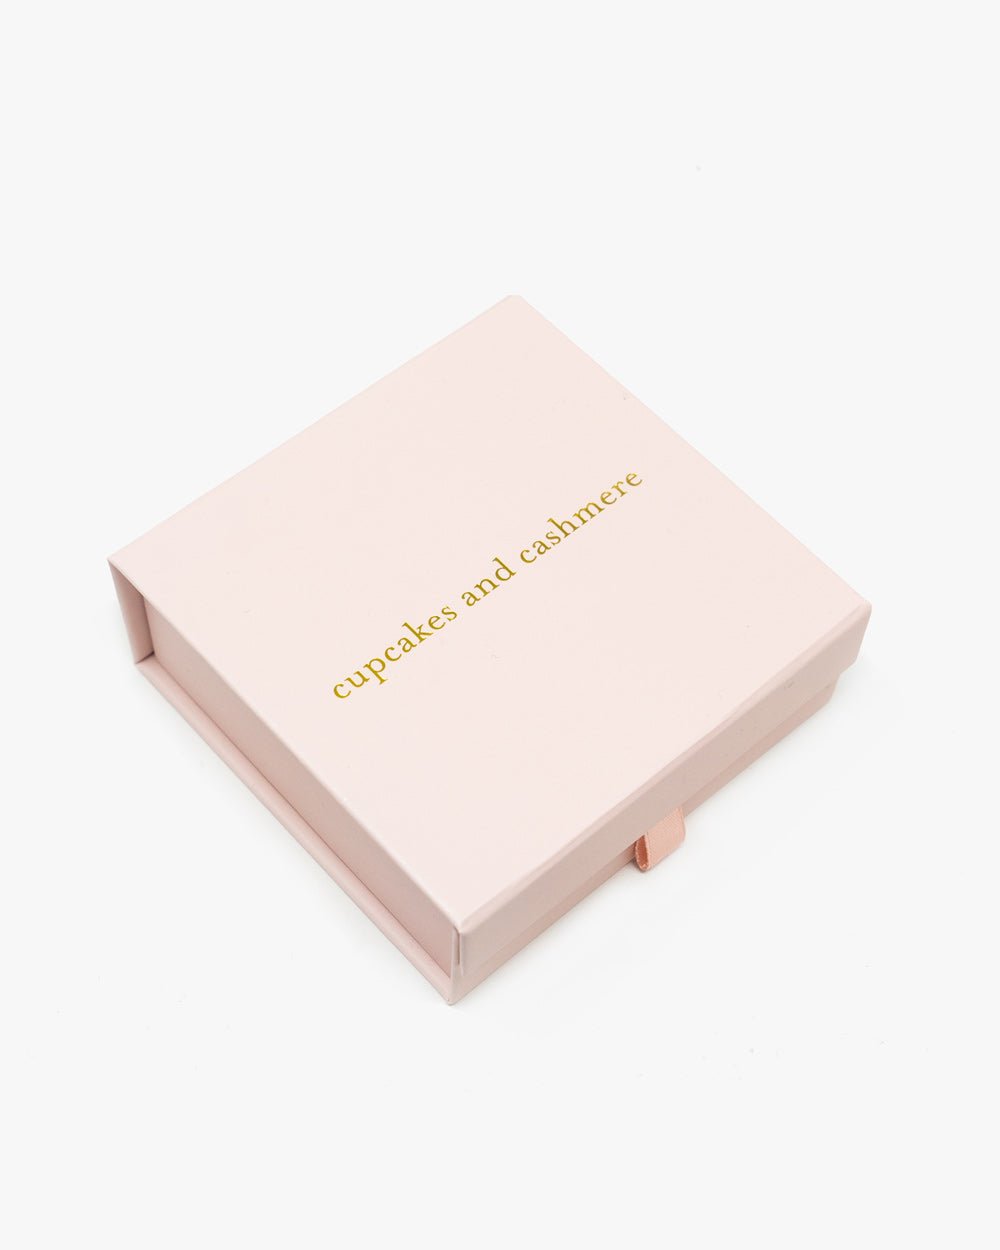 JEWELRY GIFT BOX - Shop Cupcakes and Cashmere